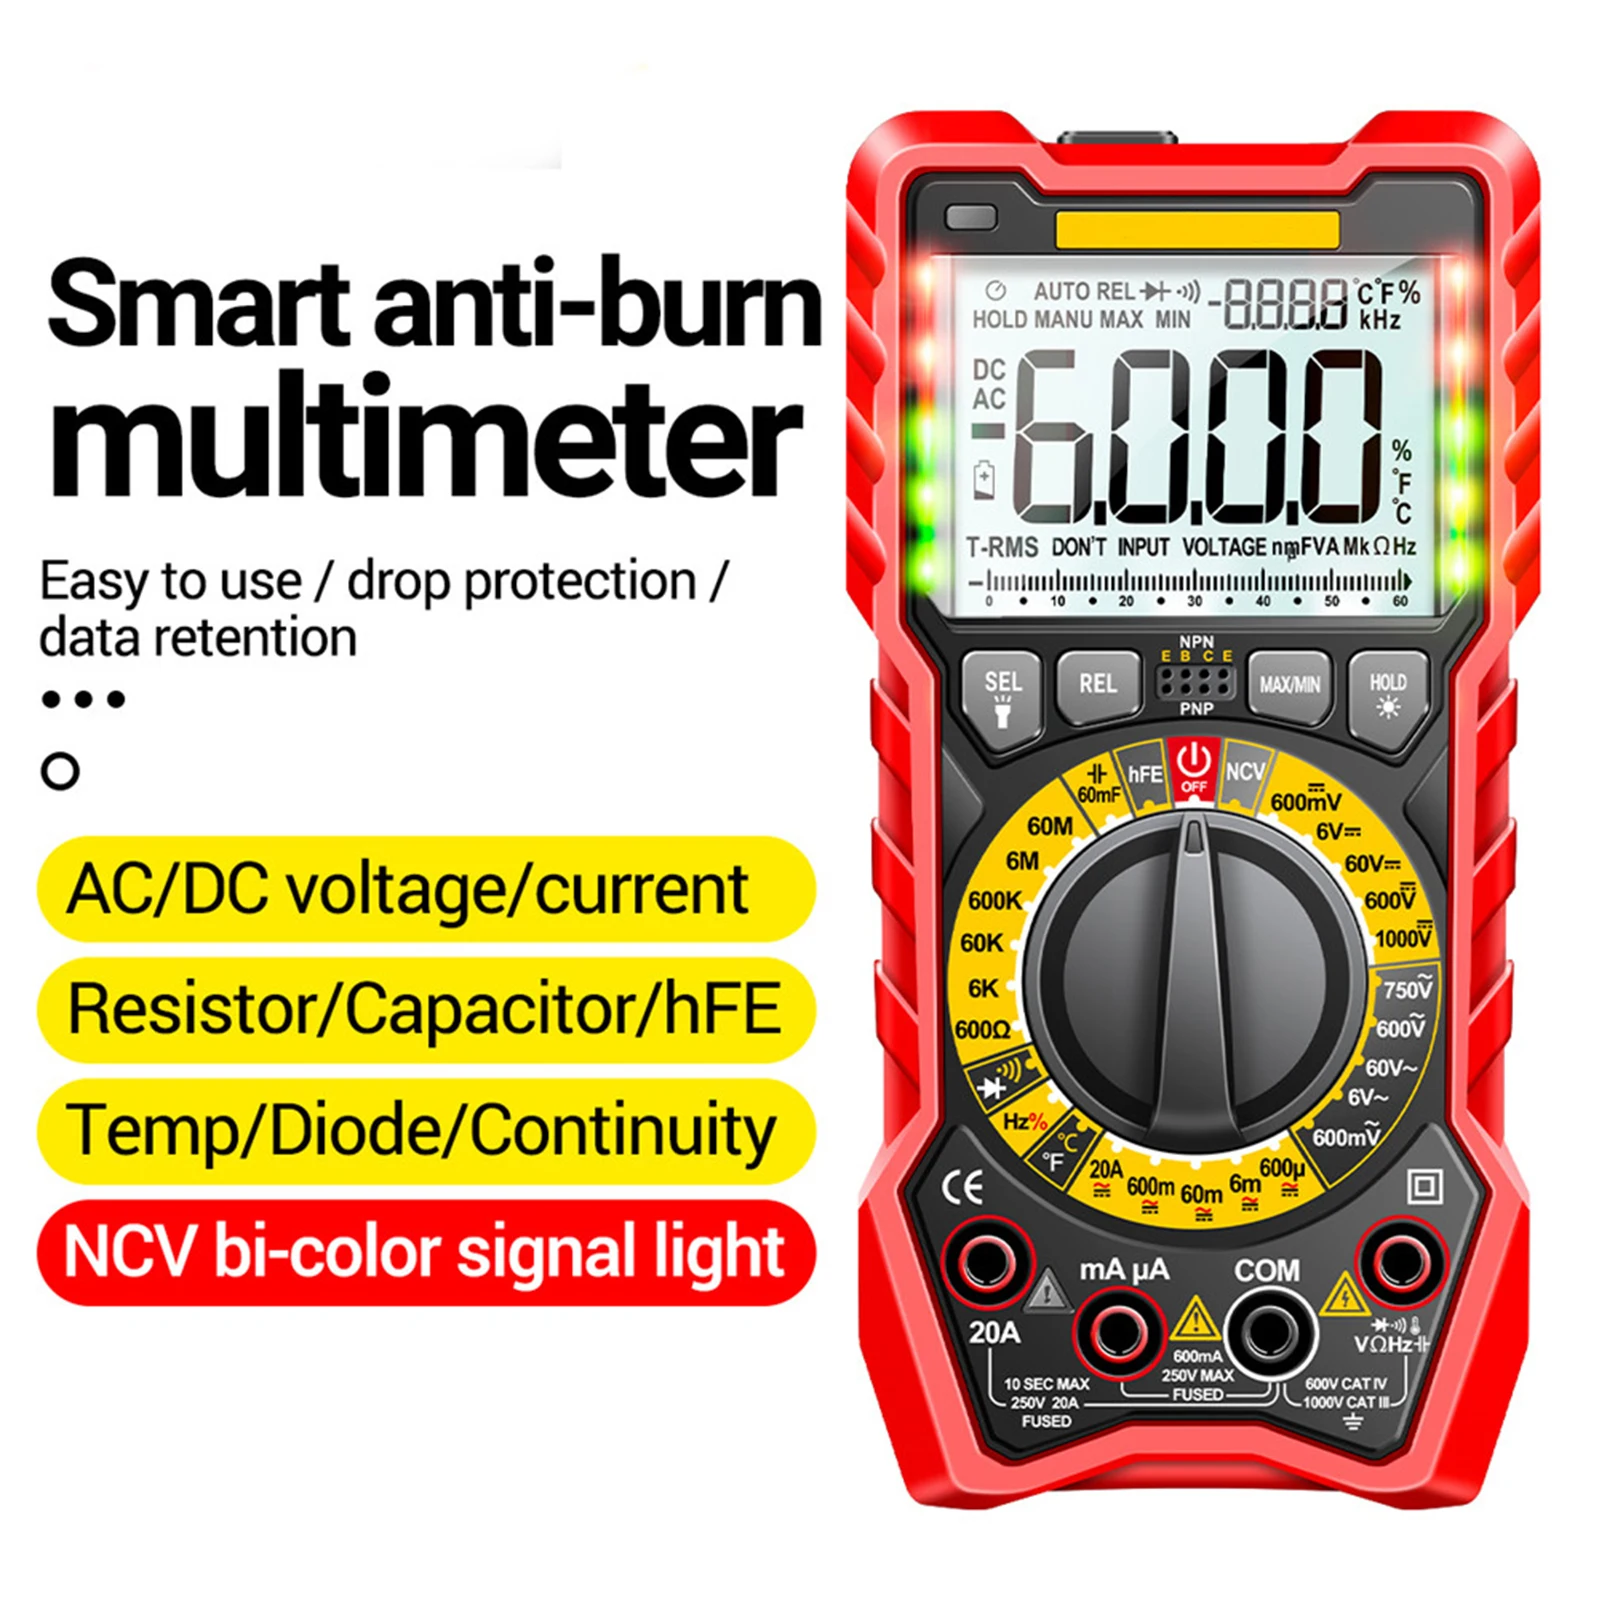 

1PC Digital Multimeter 6000 Counts Ammeter with LCD Display Backlight DC/AC Profissional Tester LCR Meter Measuring Tools